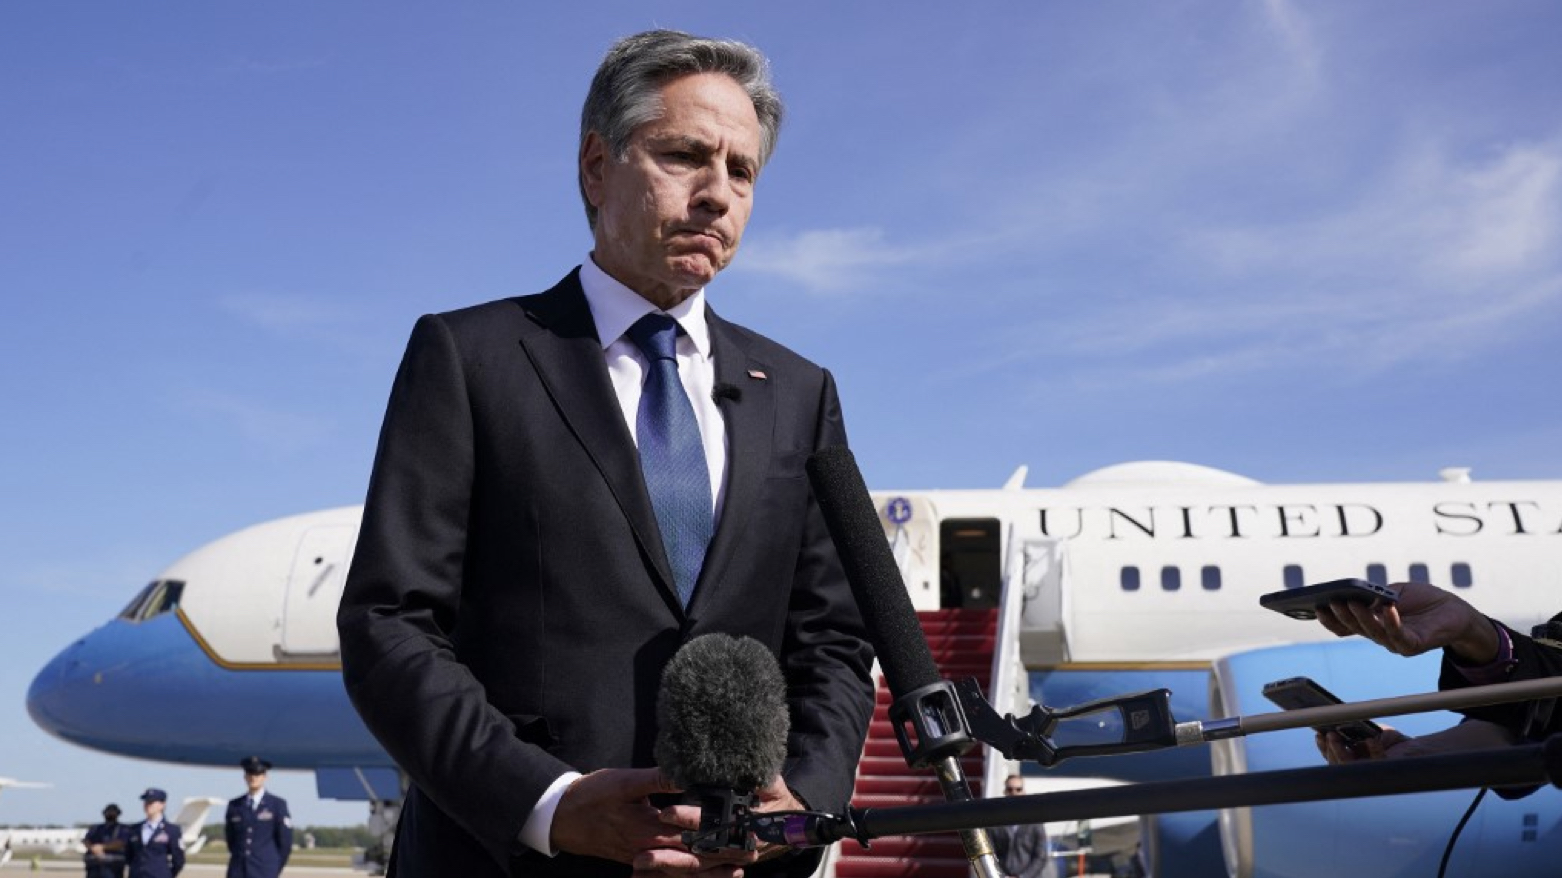 US Secretary of State Antony Blinken speaks before boarding a plane, October 11, 2023, at Joint Base Andrews, Maryland, en route to Israel (Photo: Jacquelyn Martin / POOL / AFP)